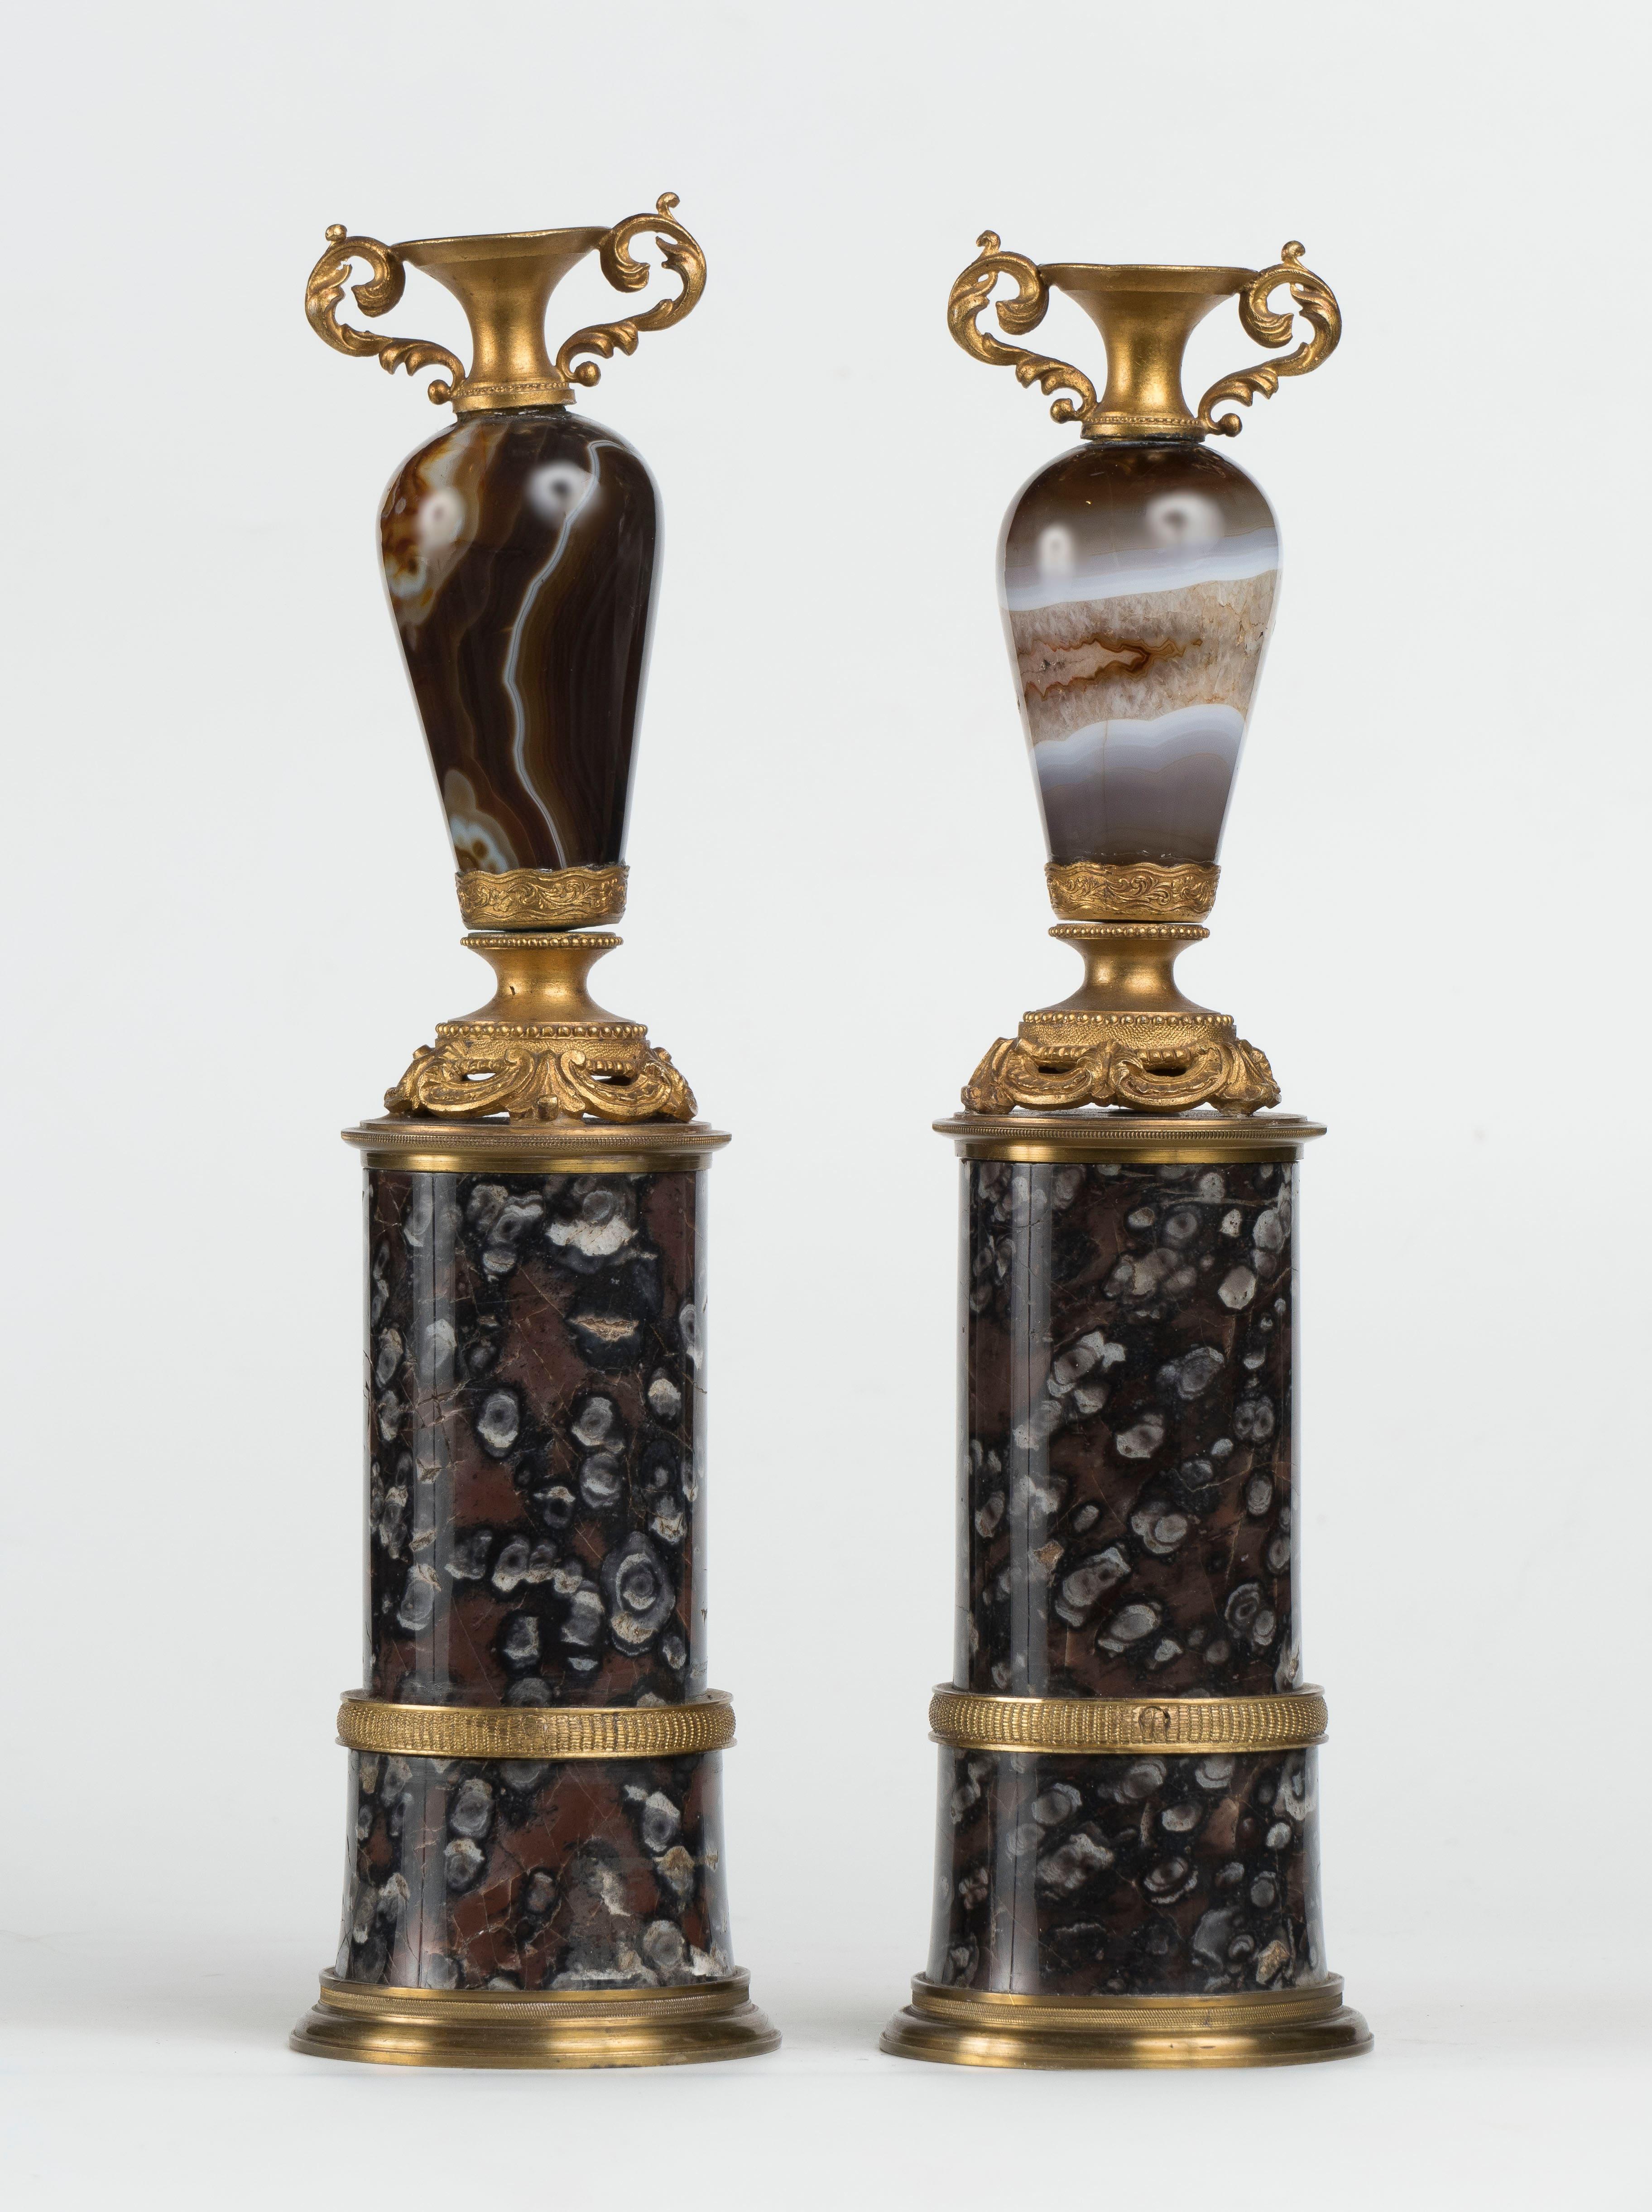 PAIR OF FRENCH MOUNTED PIETRA DURA URNS, 19TH CENTURY